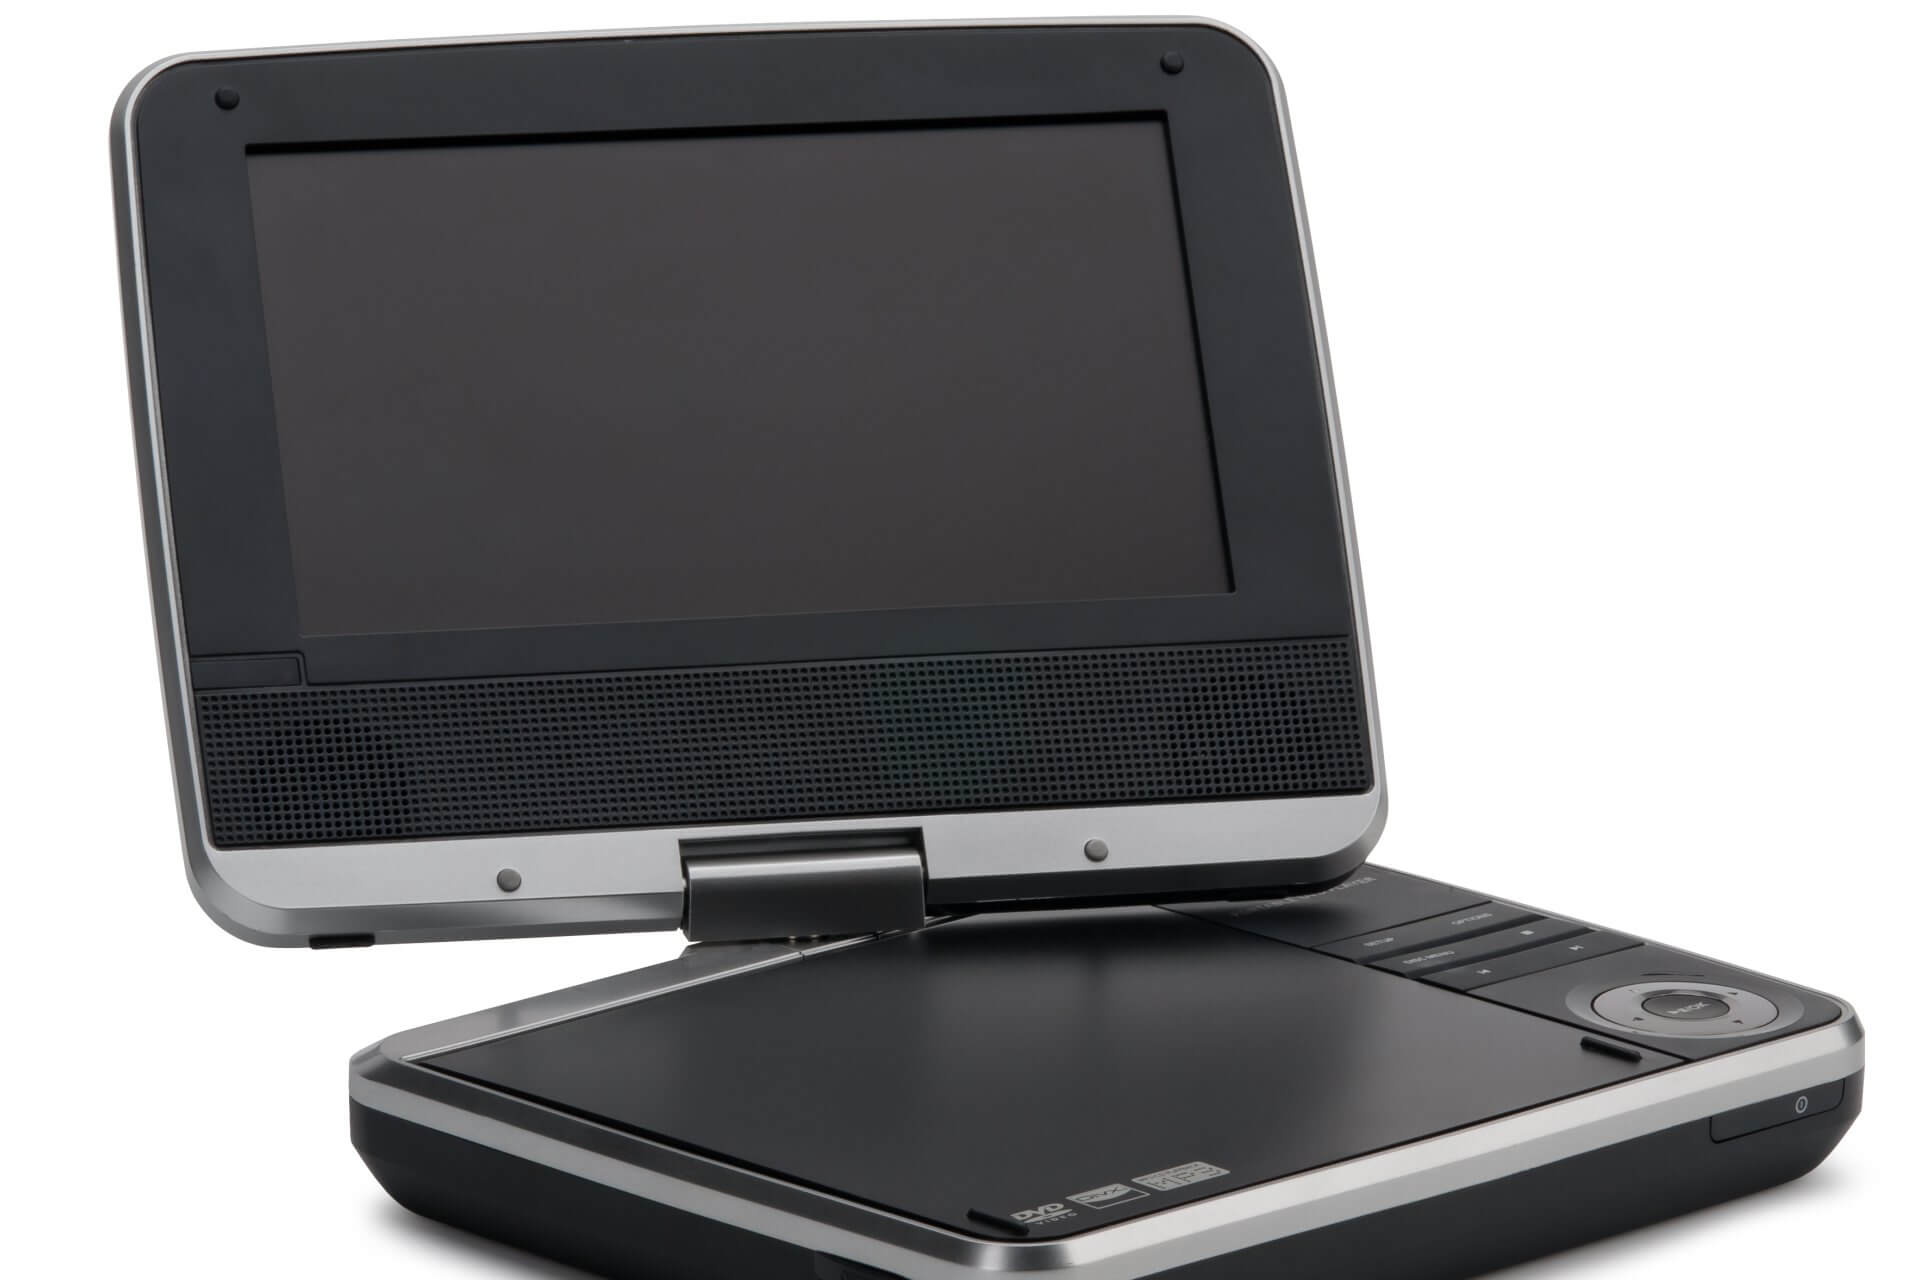 Best portable DVD players for multimedia [2020 Guide]